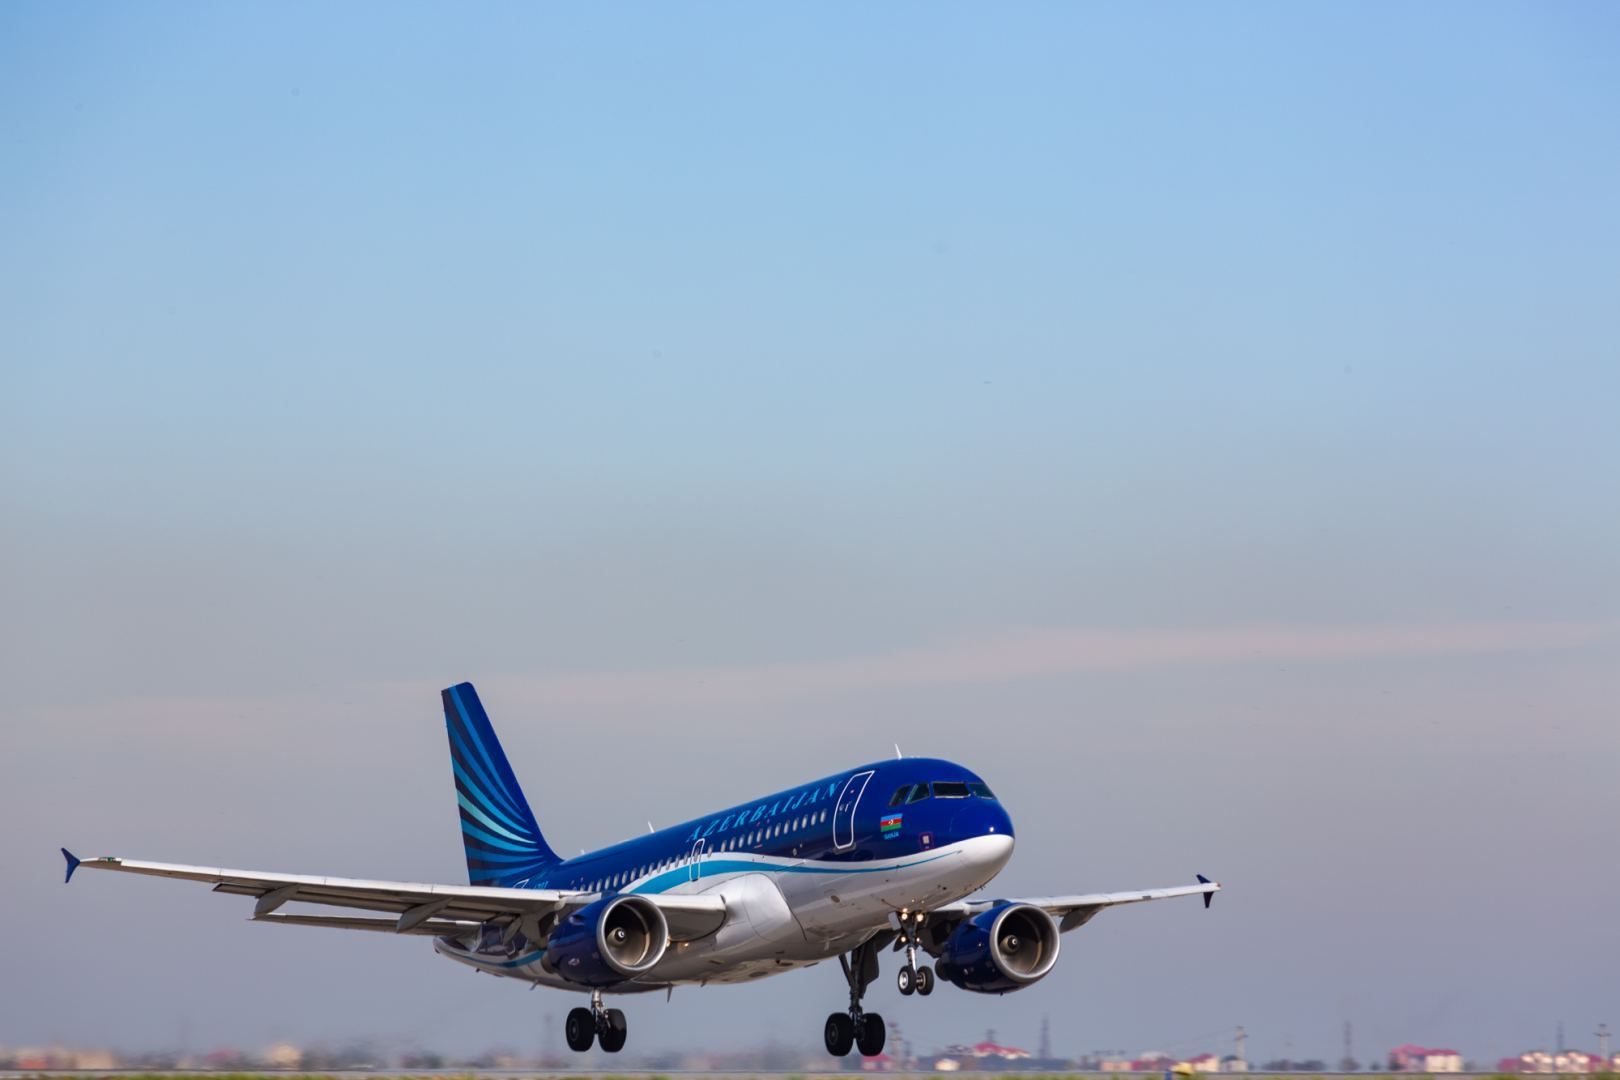 AZAL cancelled all flights to and from Israel